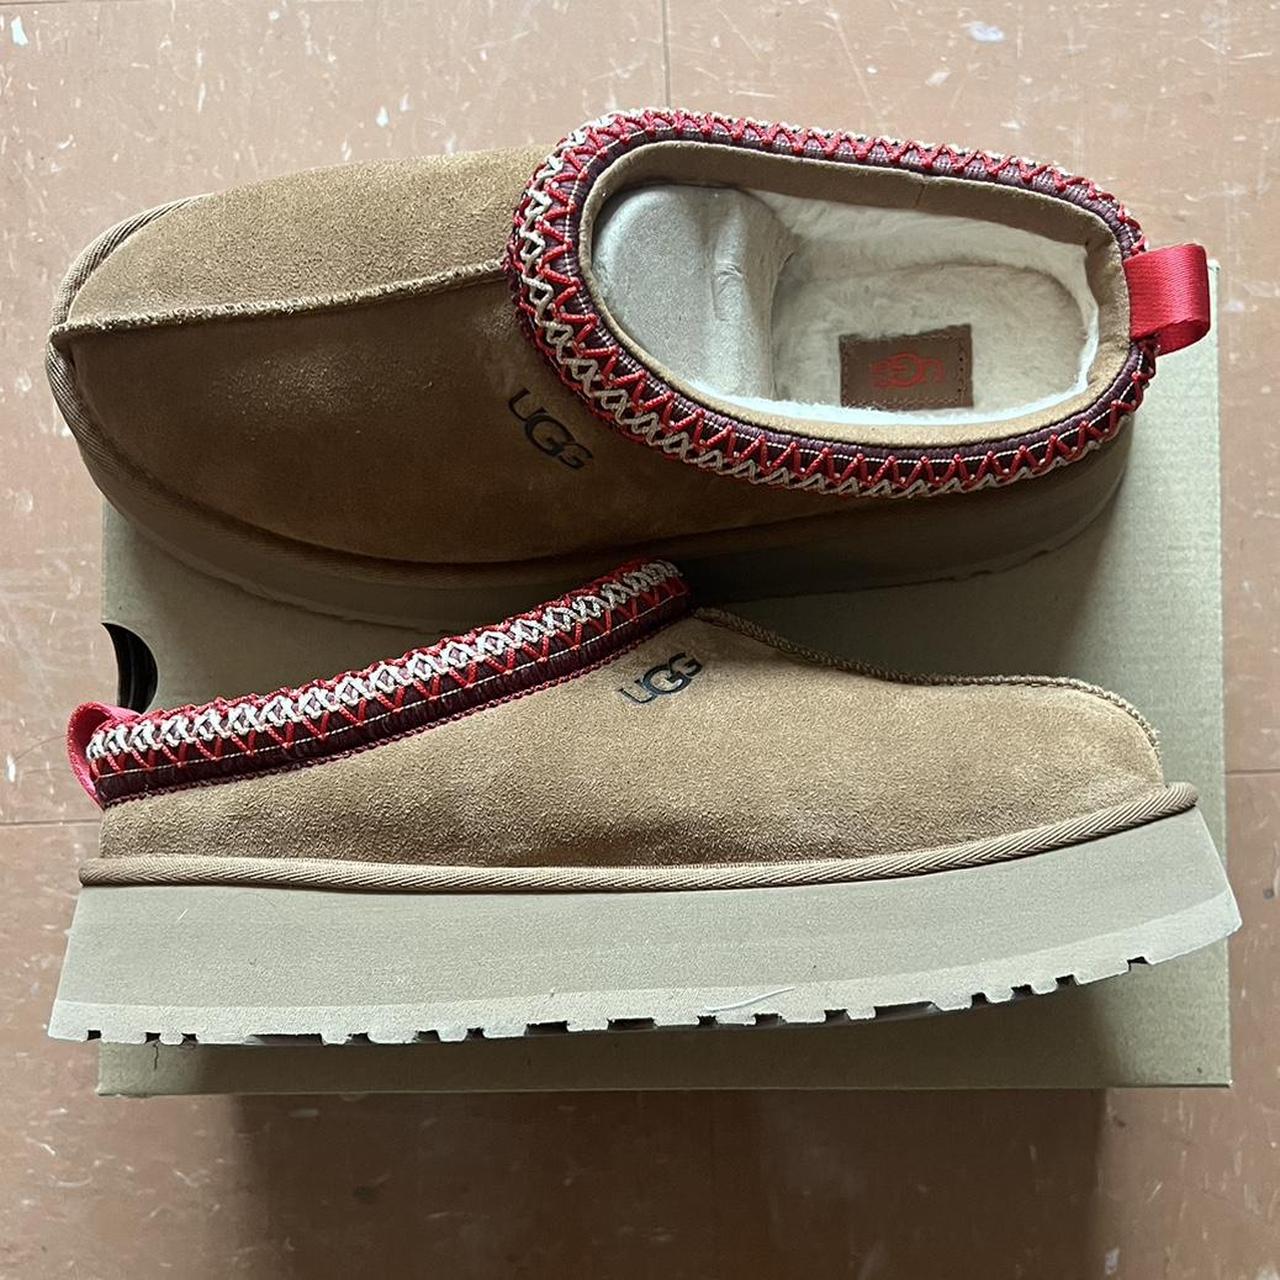 UGG Women's Tan and Red Slippers | Depop